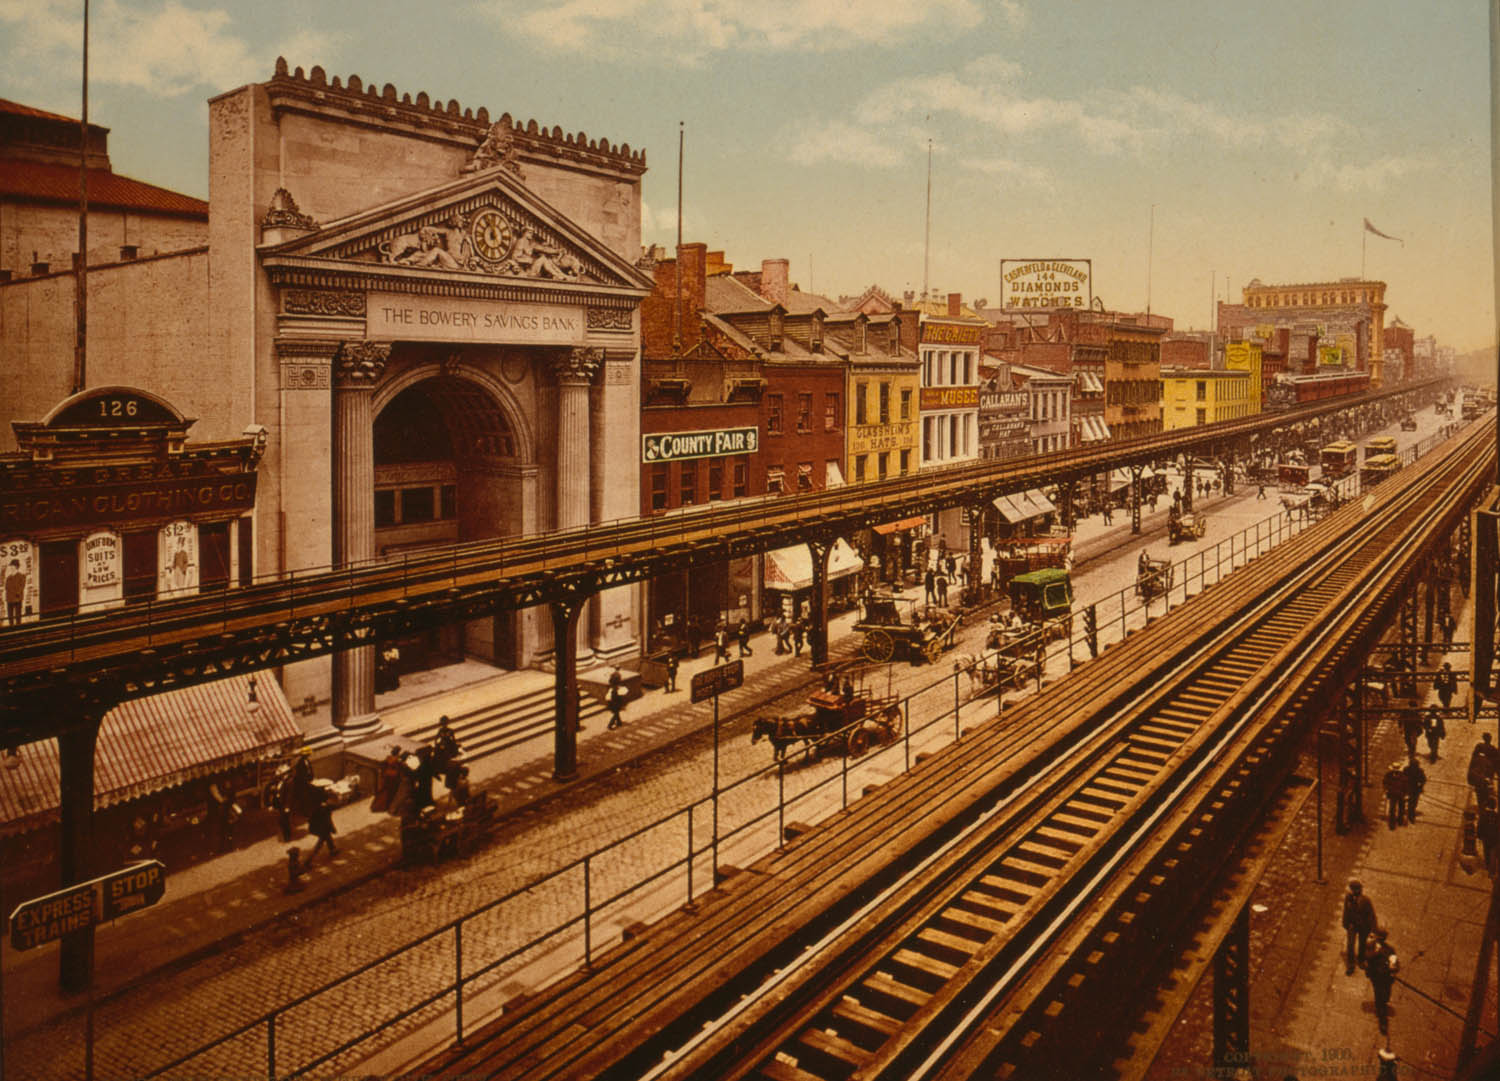 The Bowery, 1900